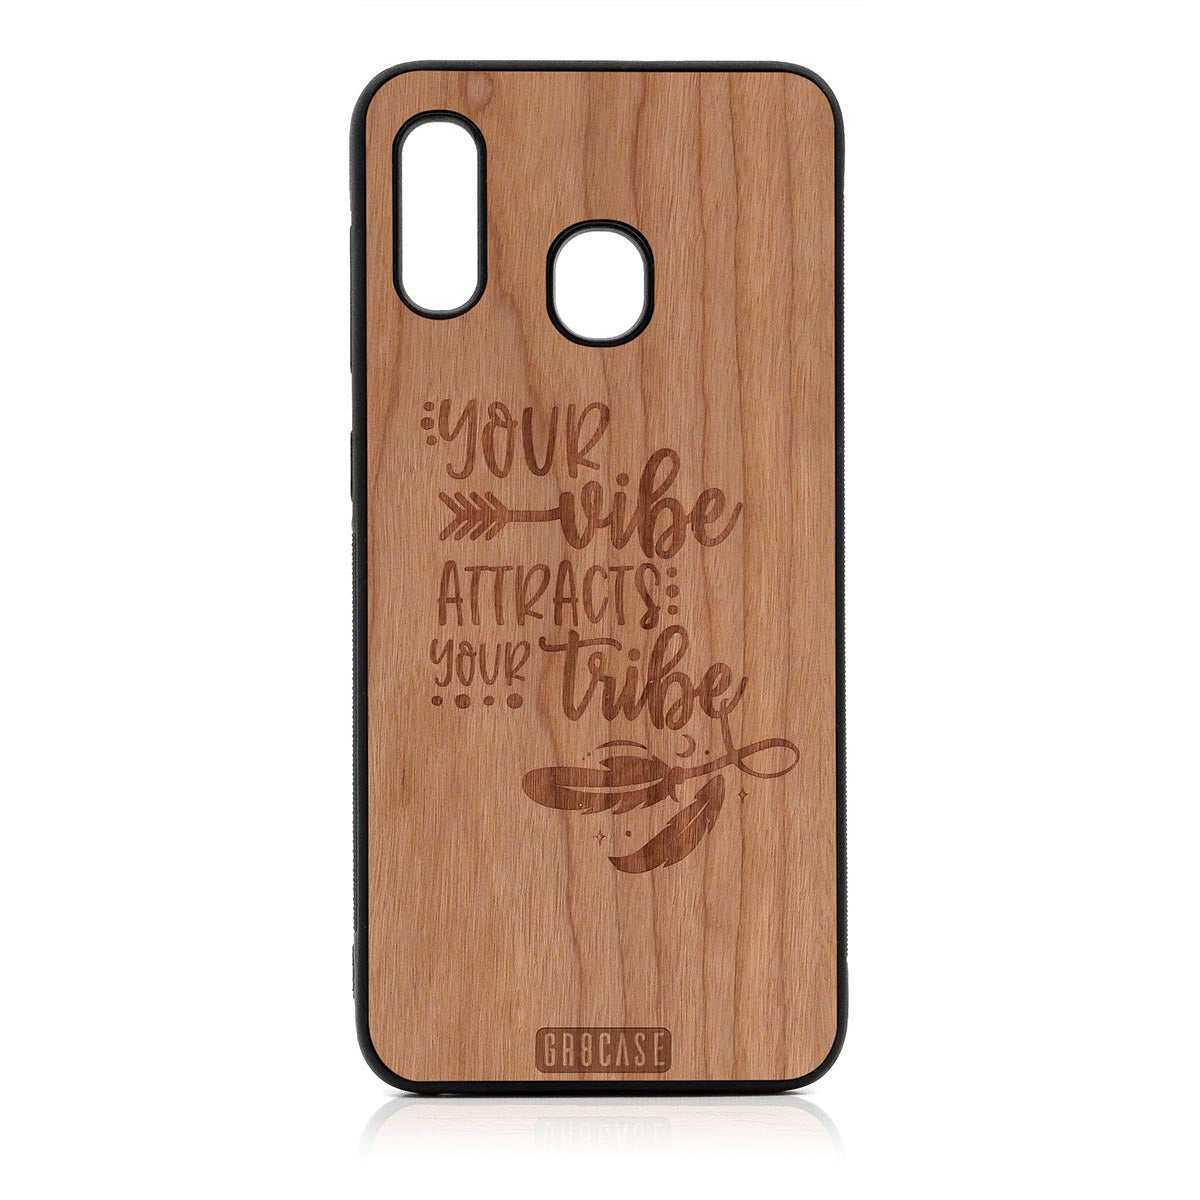 Your Vibe Attracts Your Tribe Design Wood Case For Samsung Galaxy A50